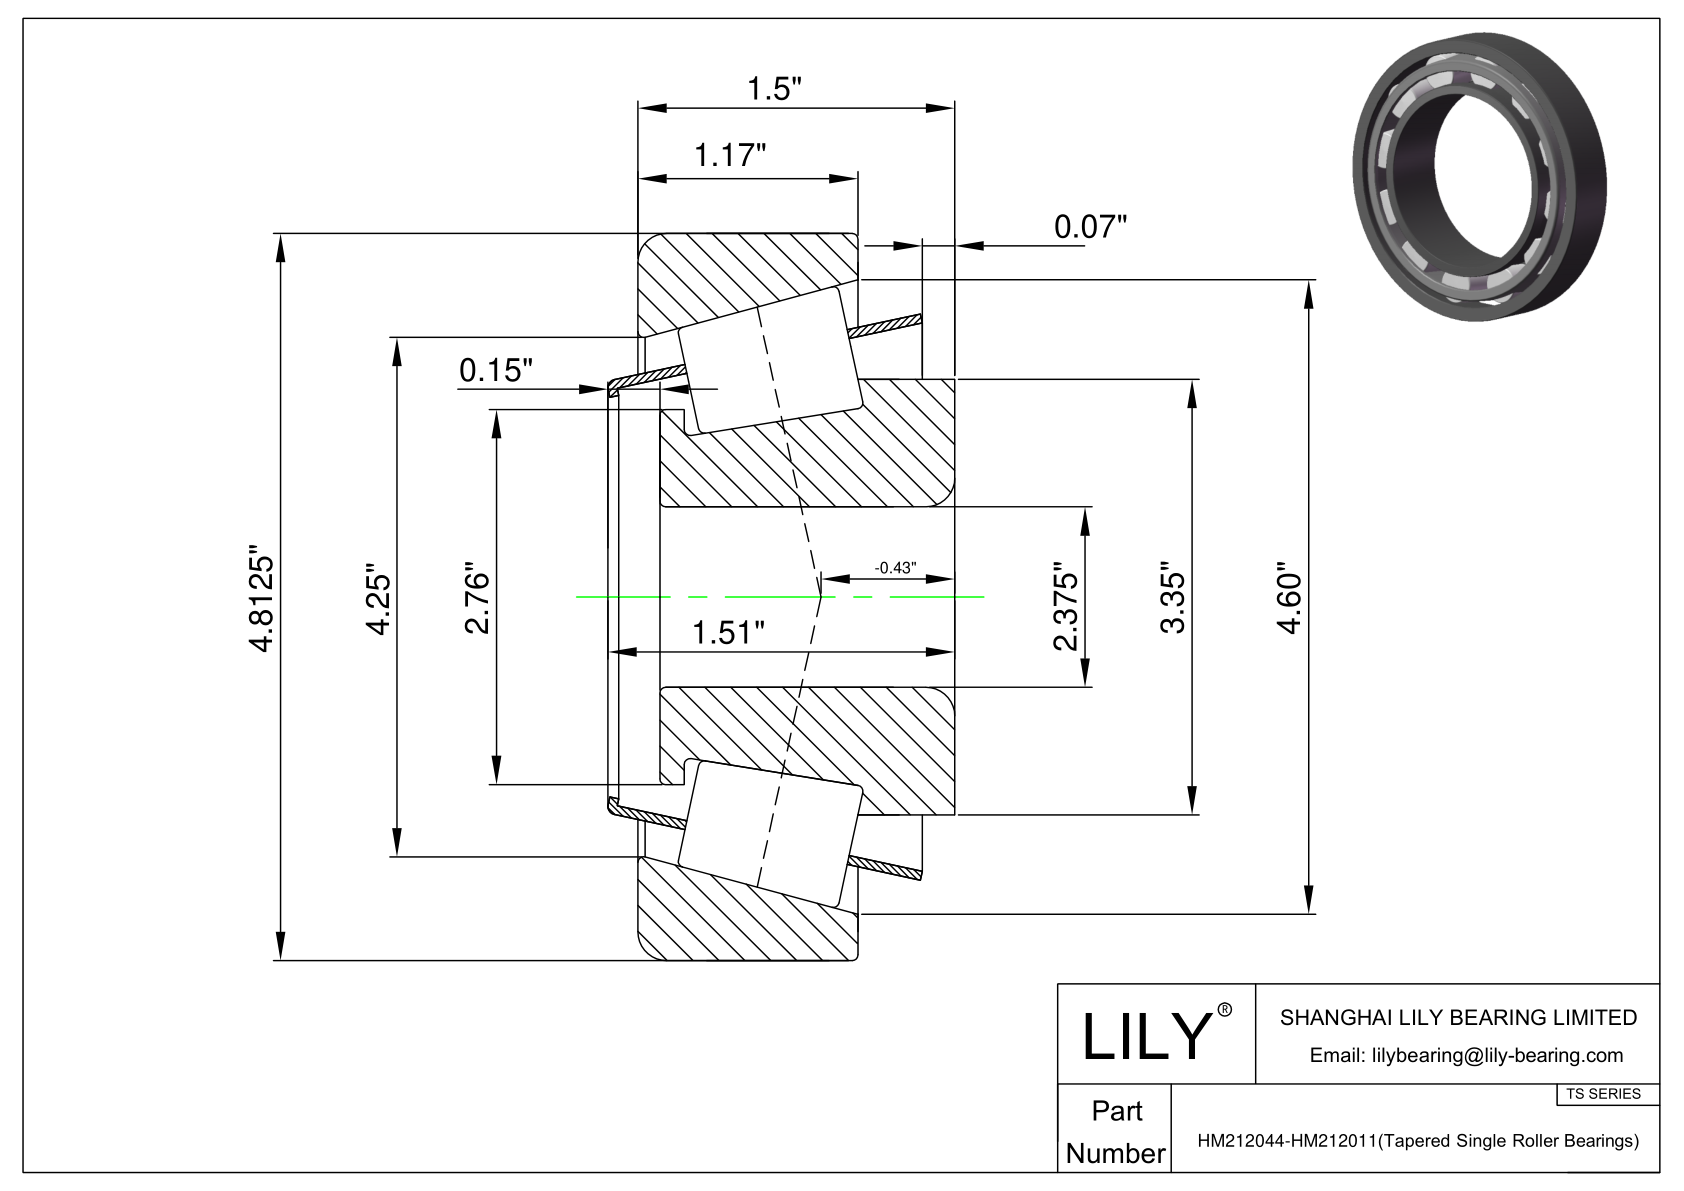 HM212044-HM212011 TS (Tapered Single Roller Bearings) (Imperial) cad drawing